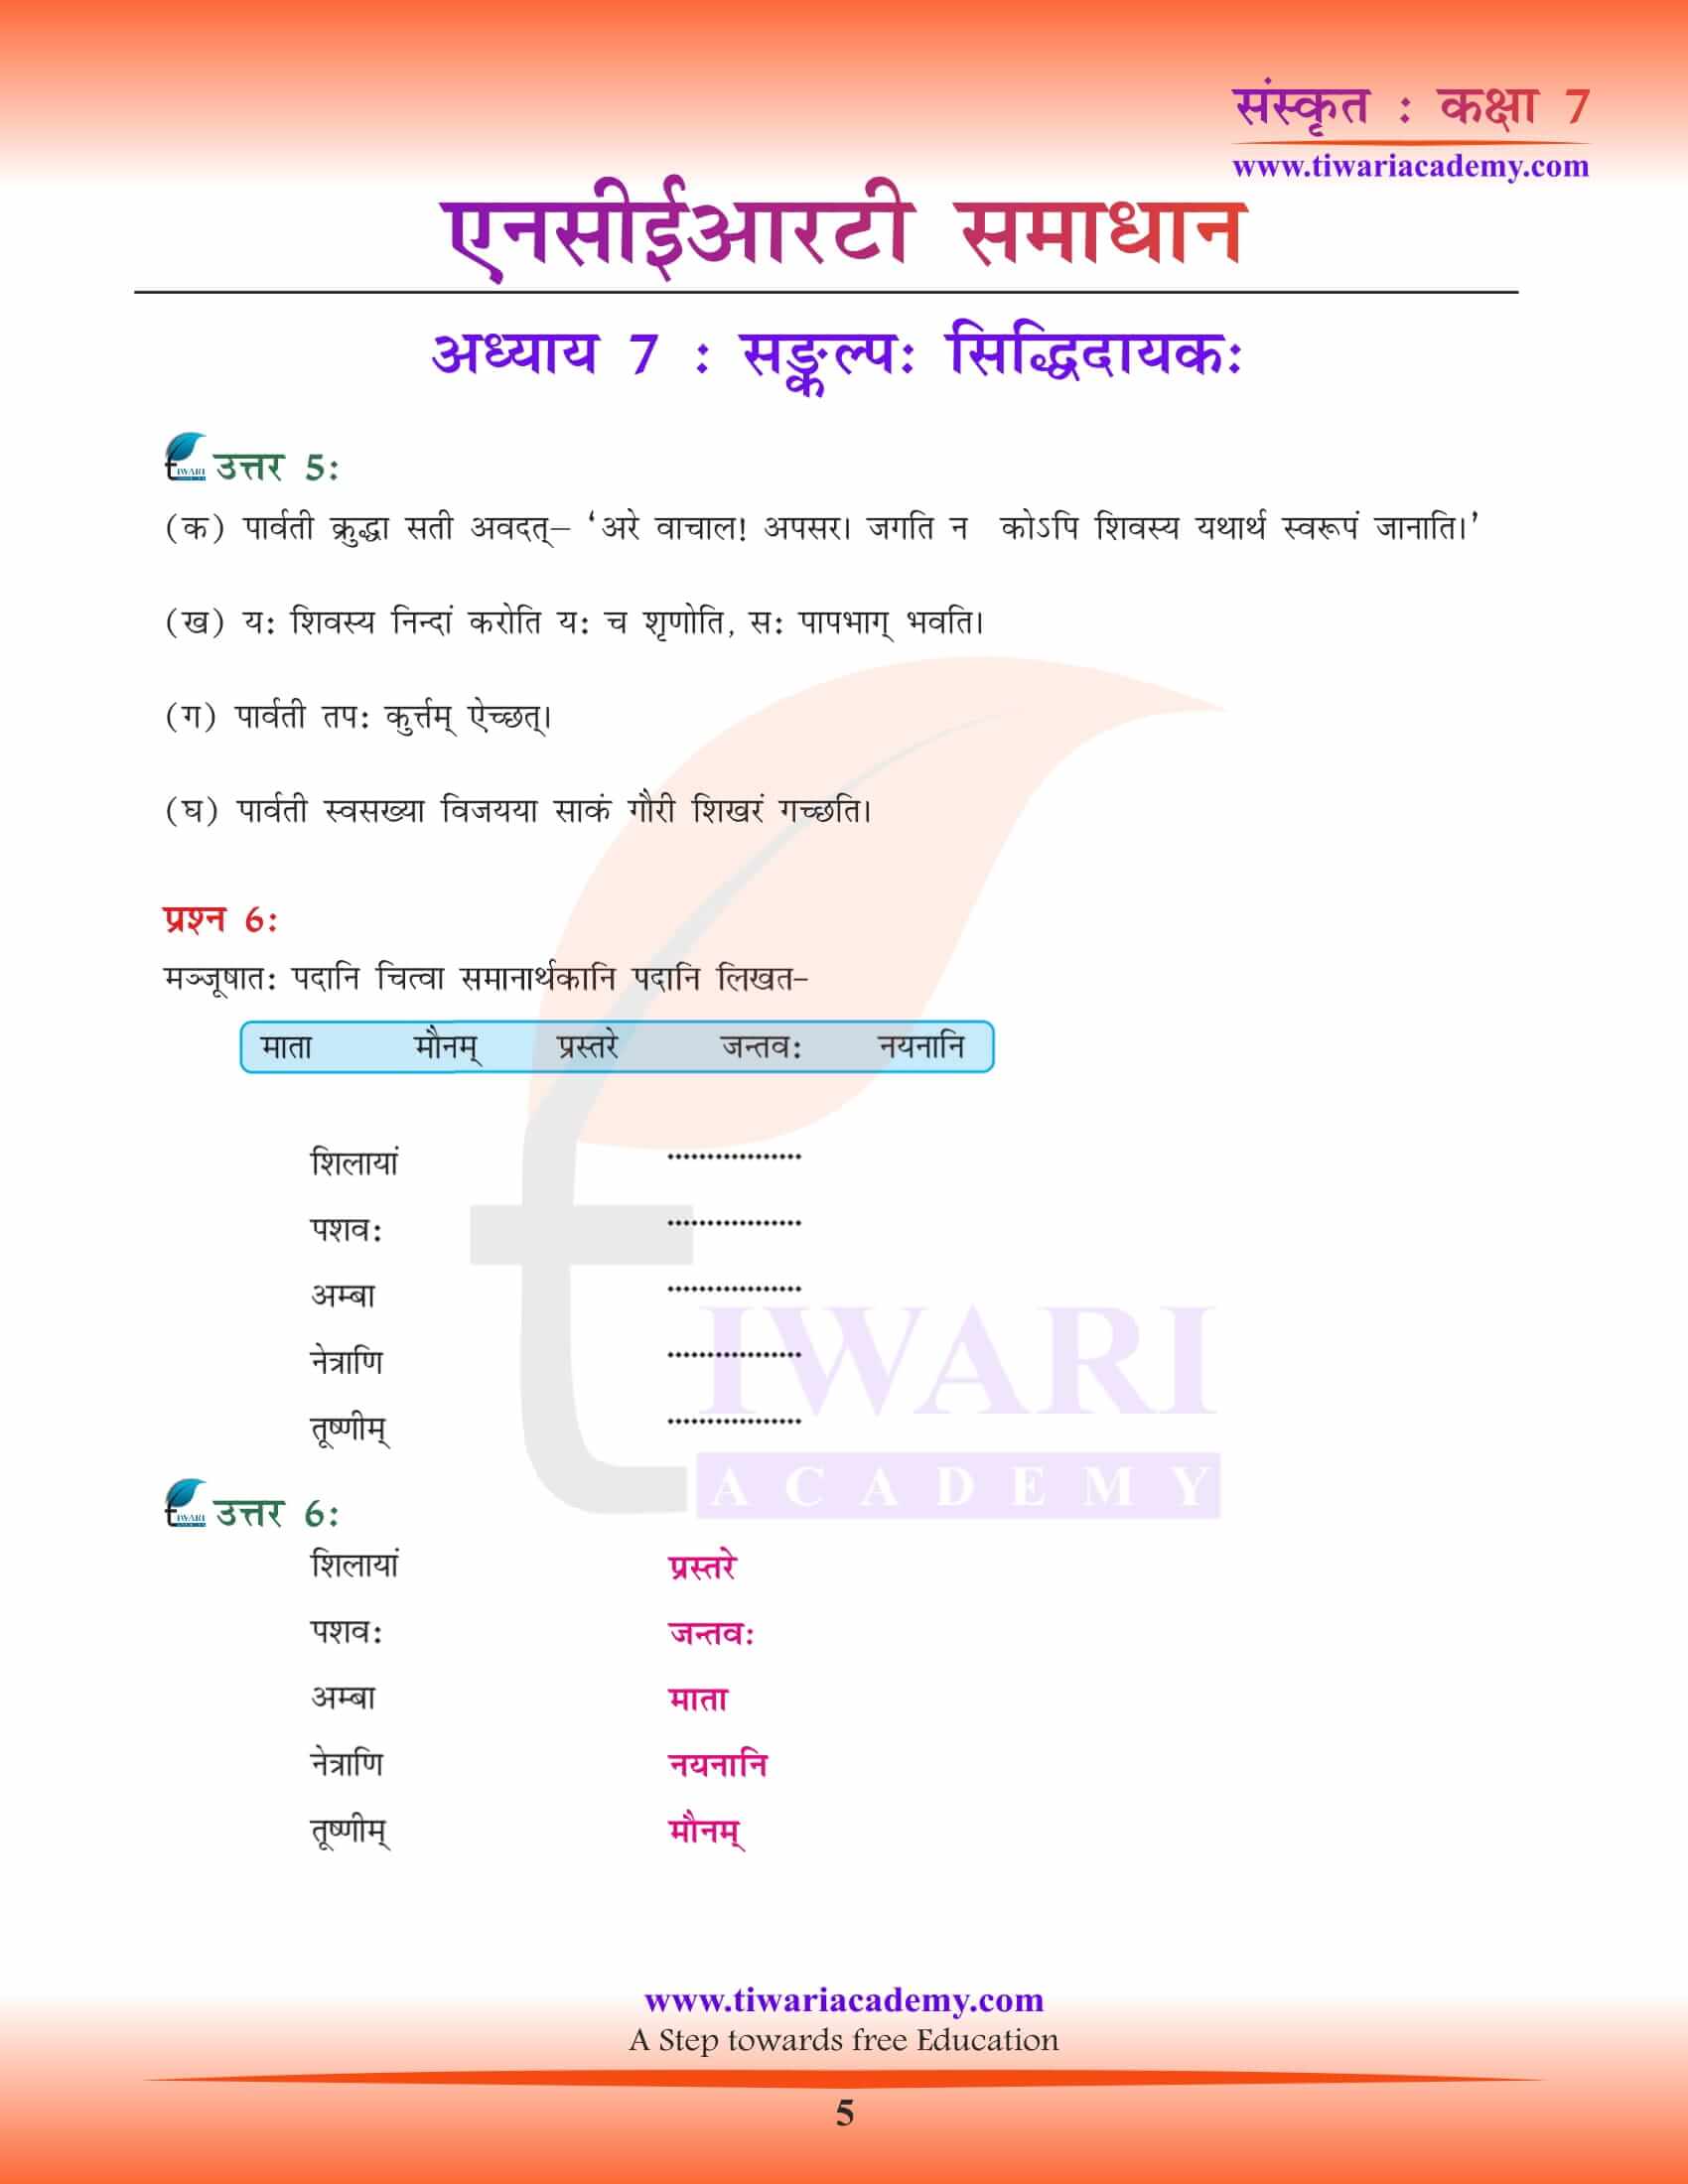 NCERT Solutions for Class 7 Sanskrit Chapter 7 answers